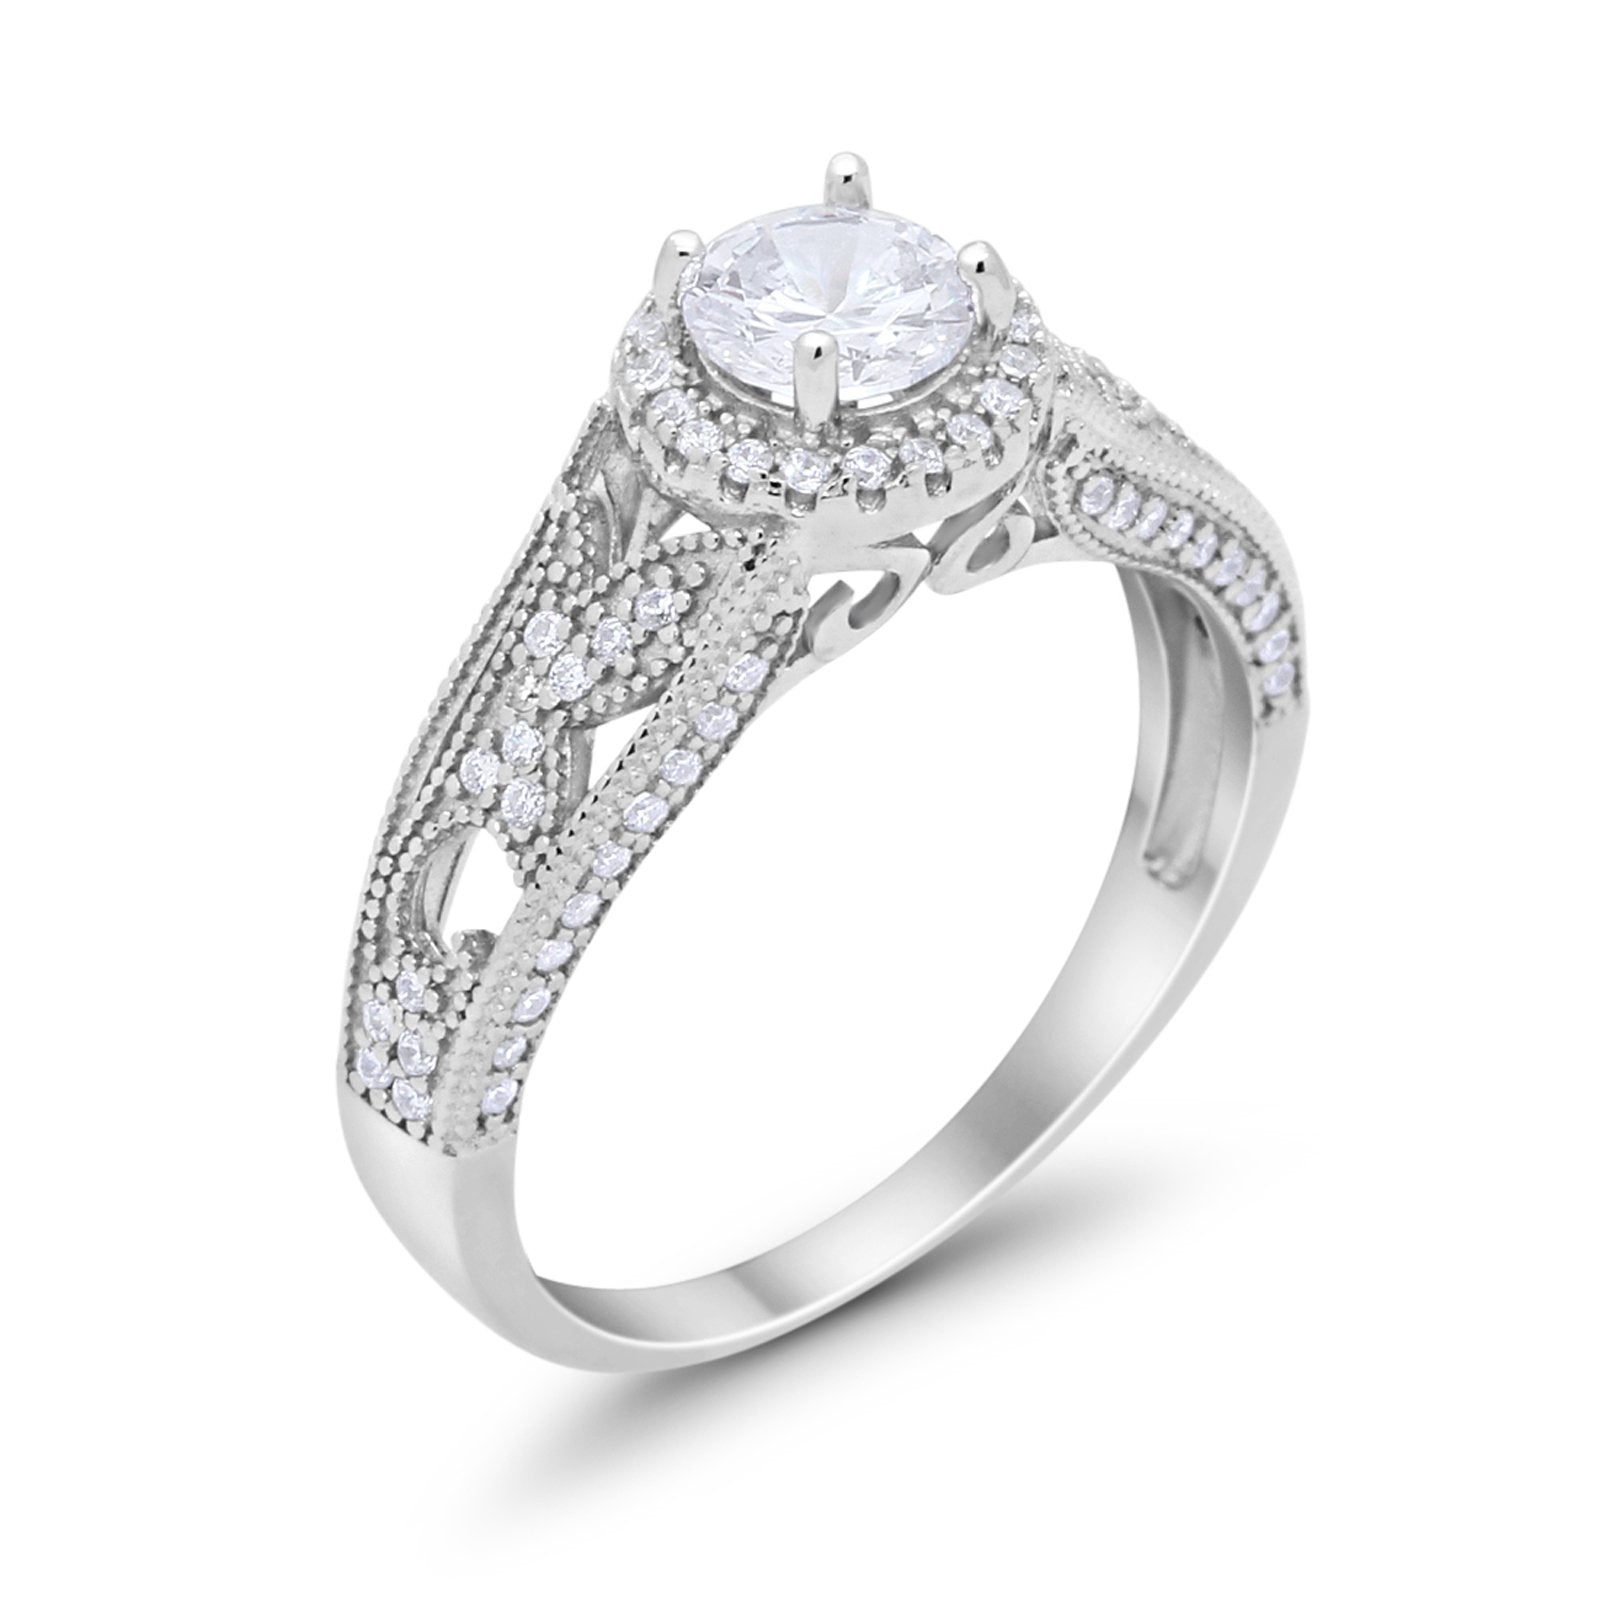 Halo Art Deco Engagement Ring Bridal Simulated CZ 925 Sterling Silver